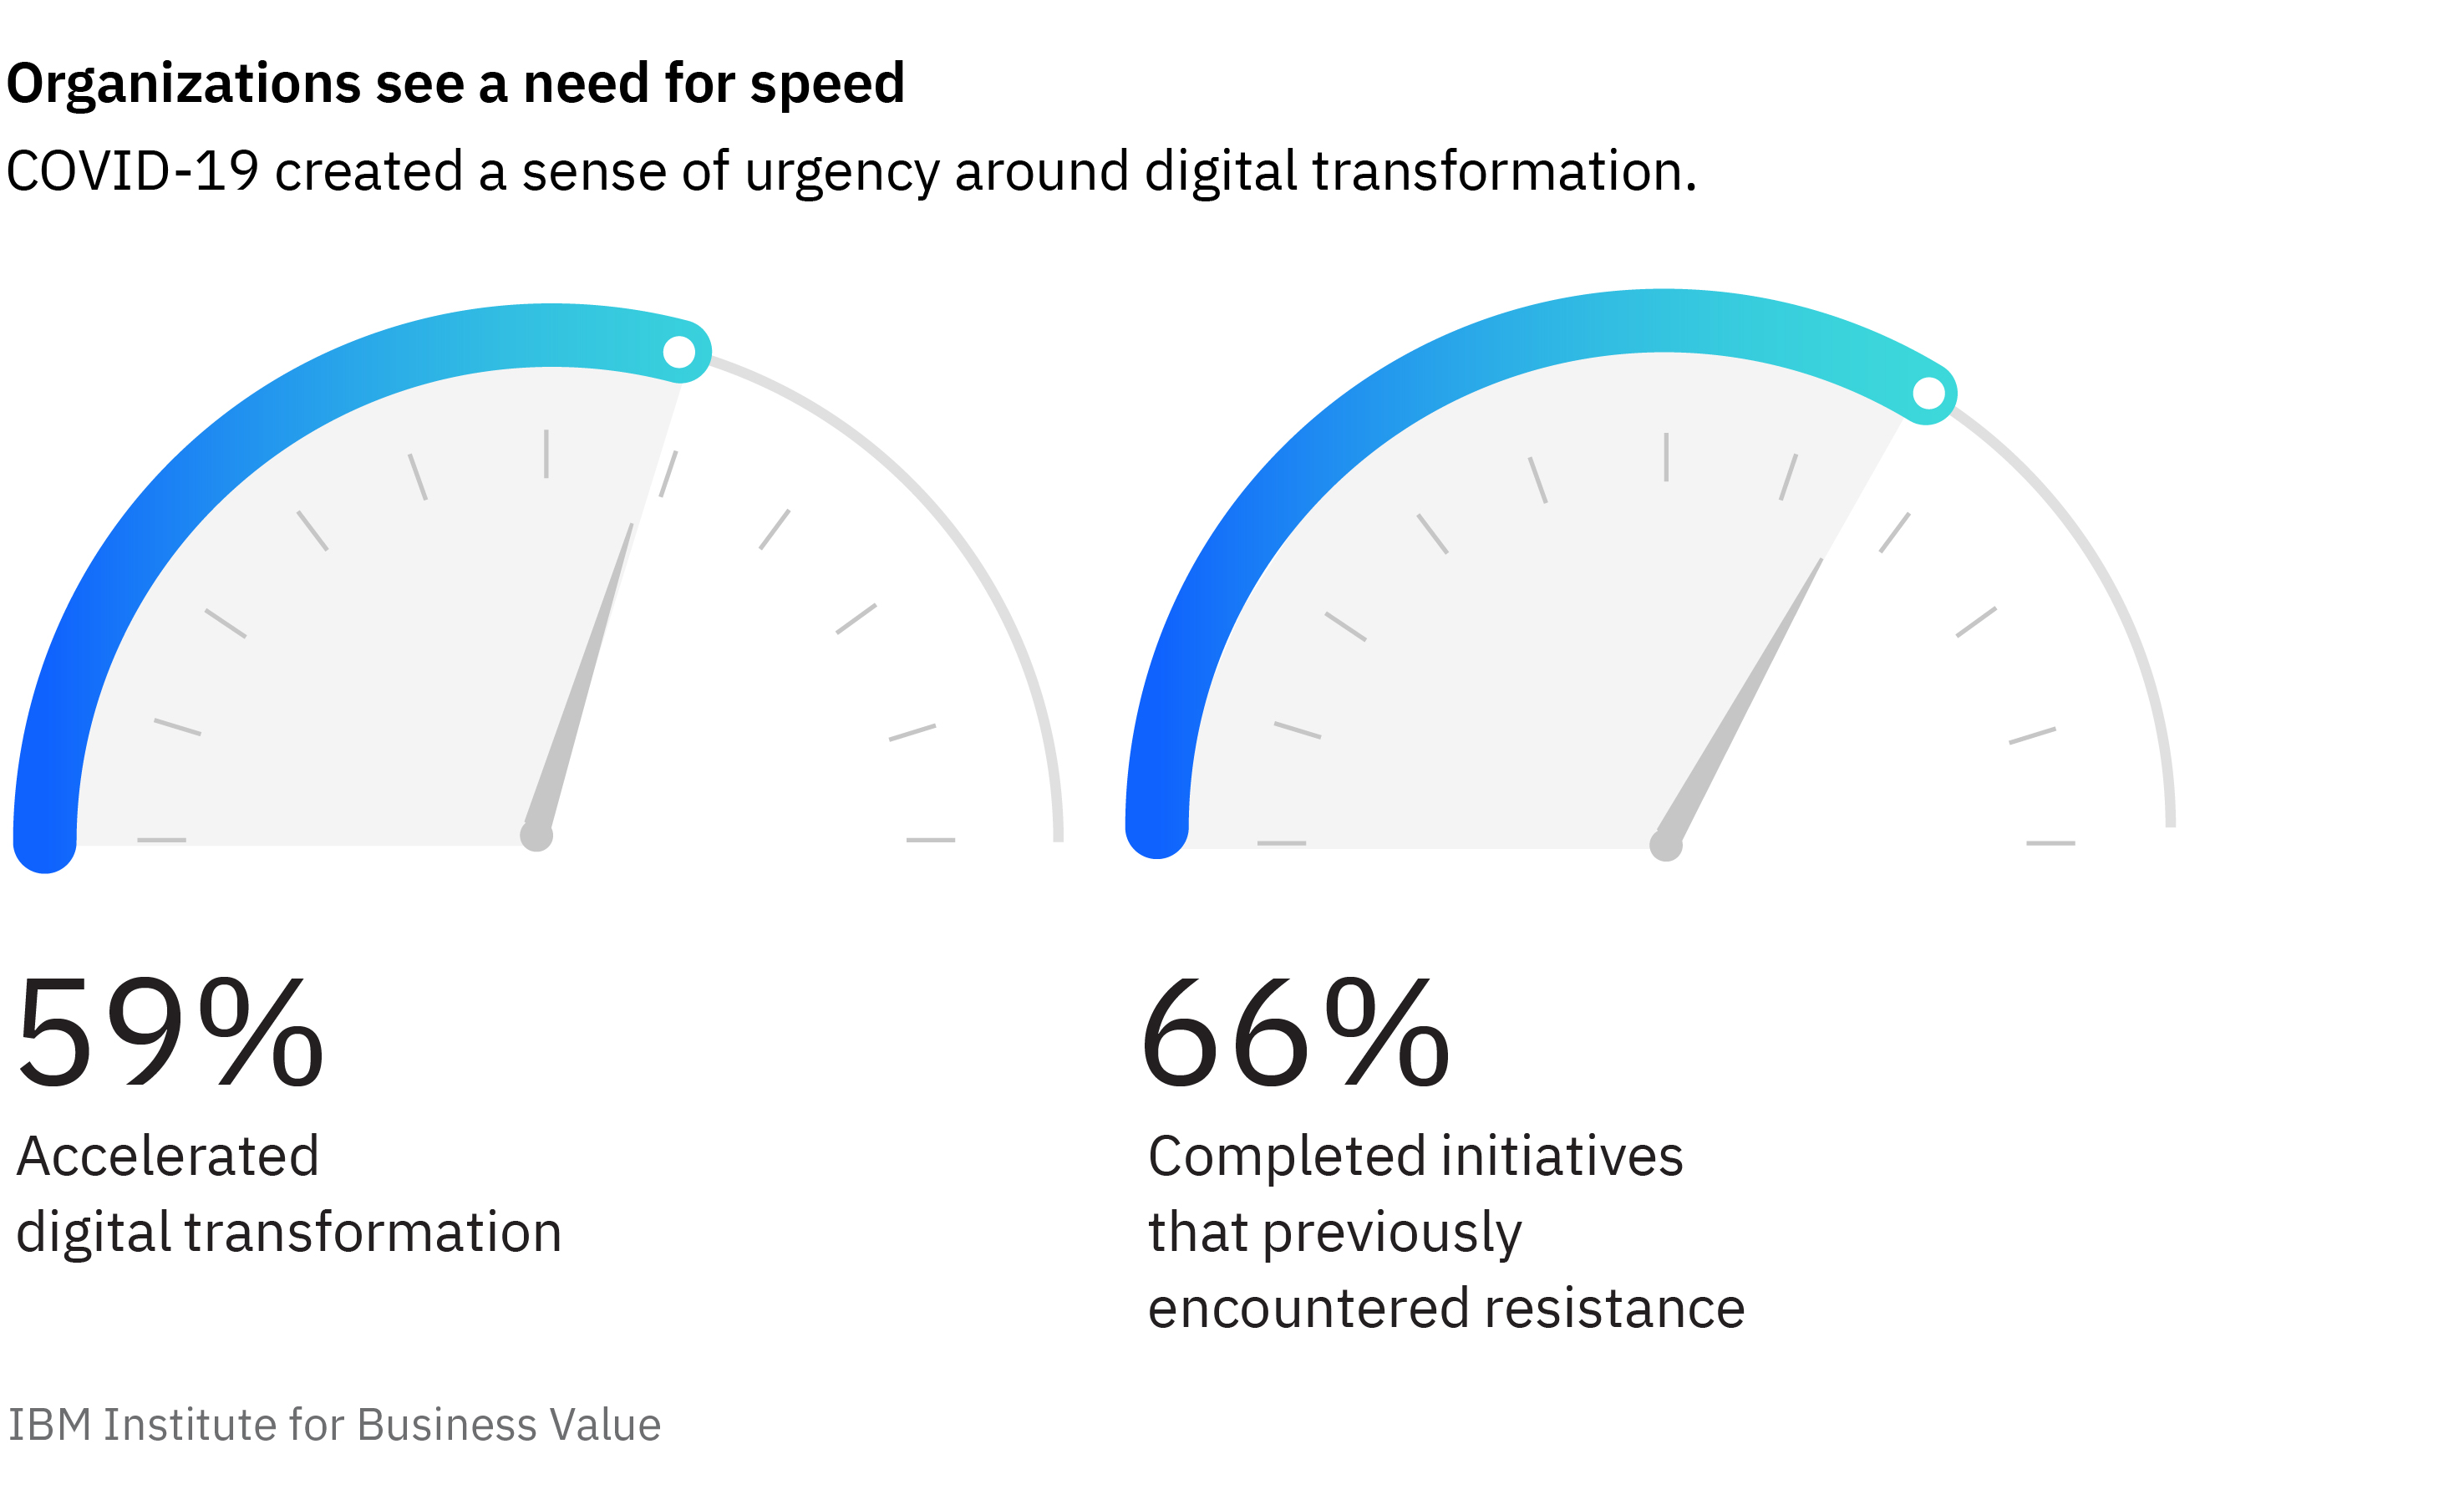 Organizations see a need for speed